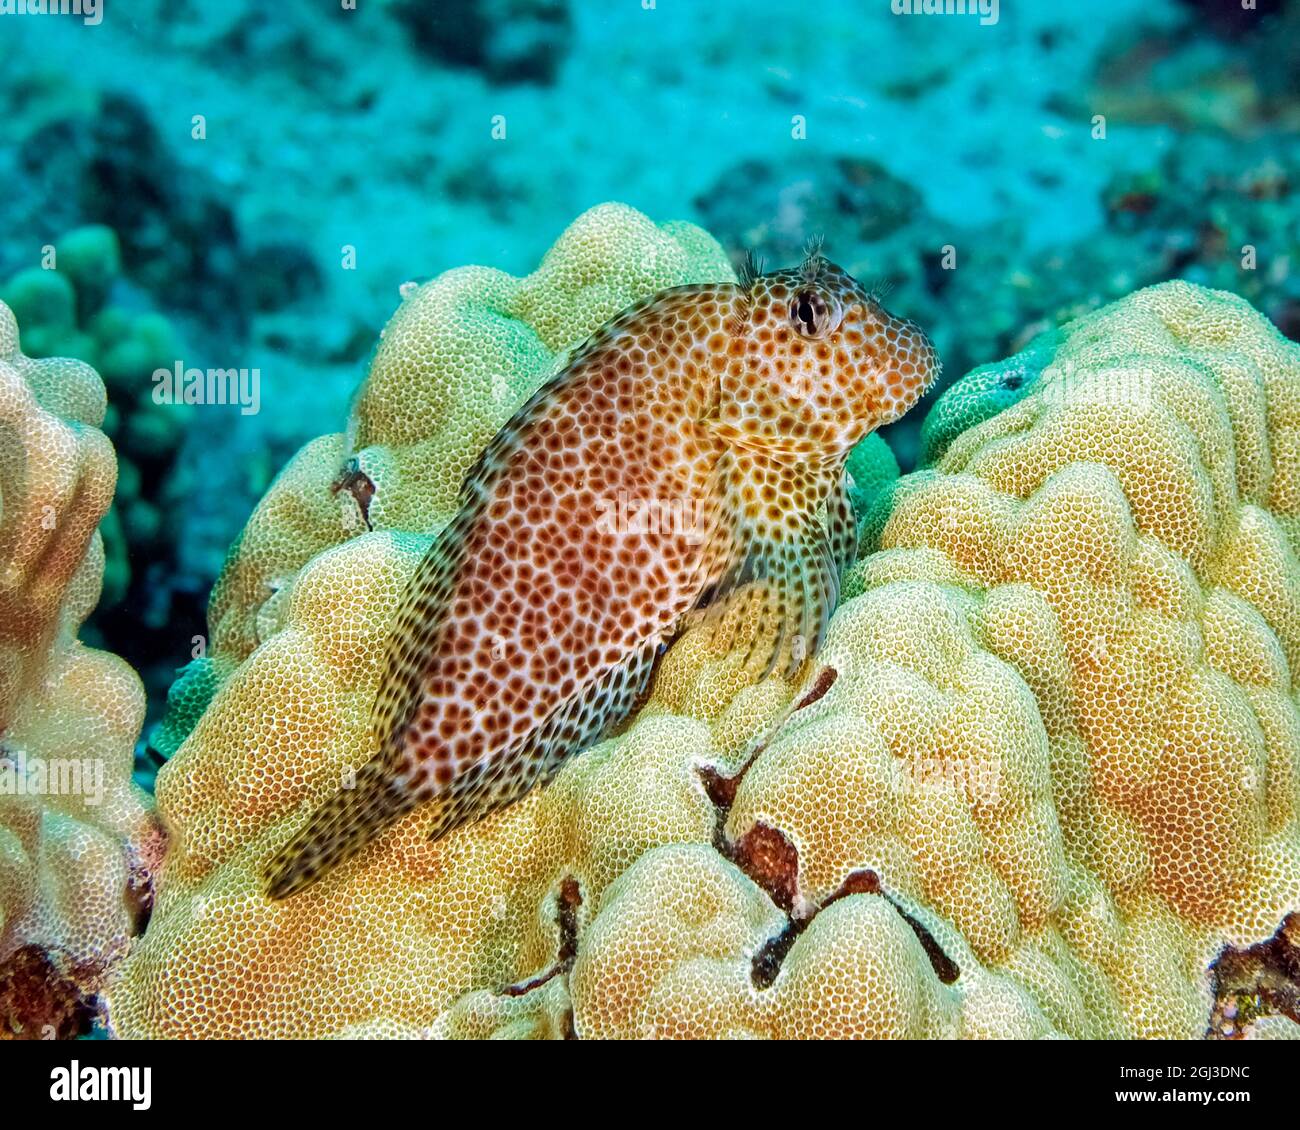 leopard blenny, spotted coral blenny, shortbodied blenny, Exallias brevis, Kona Coast, Big Island, Hawaii, USA, Pacific Ocean Stock Photo